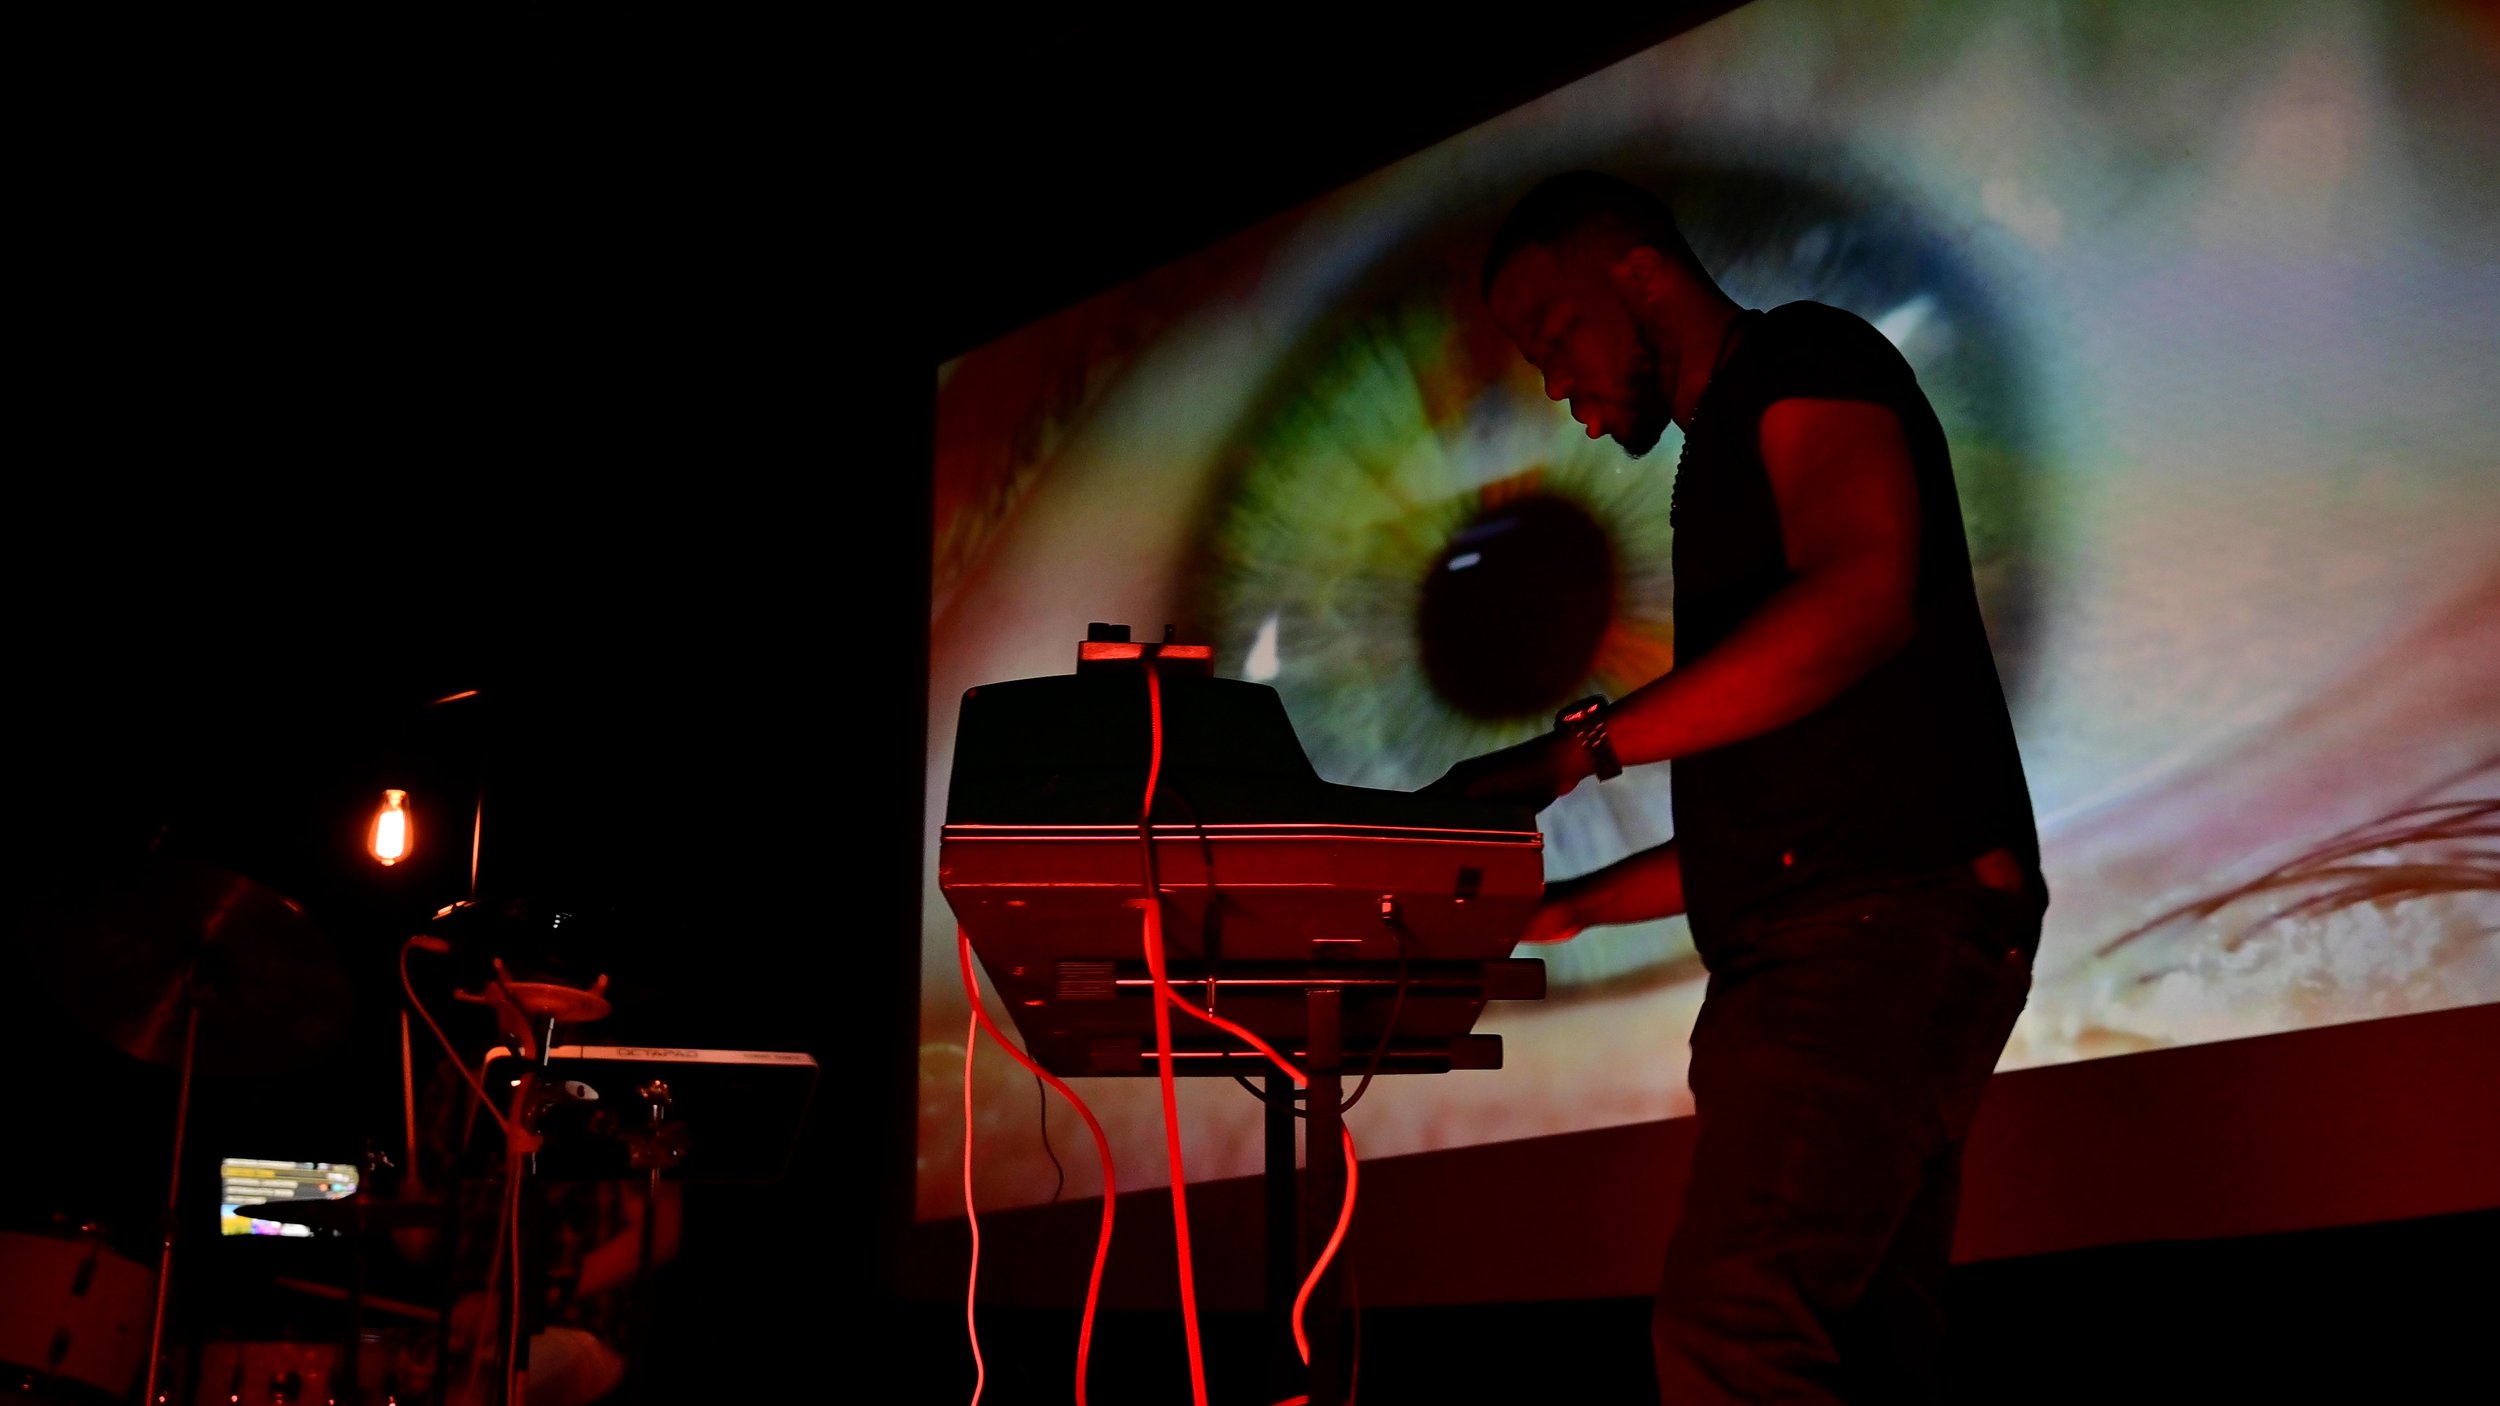 Keyboardist performing in front of Visibox visuals